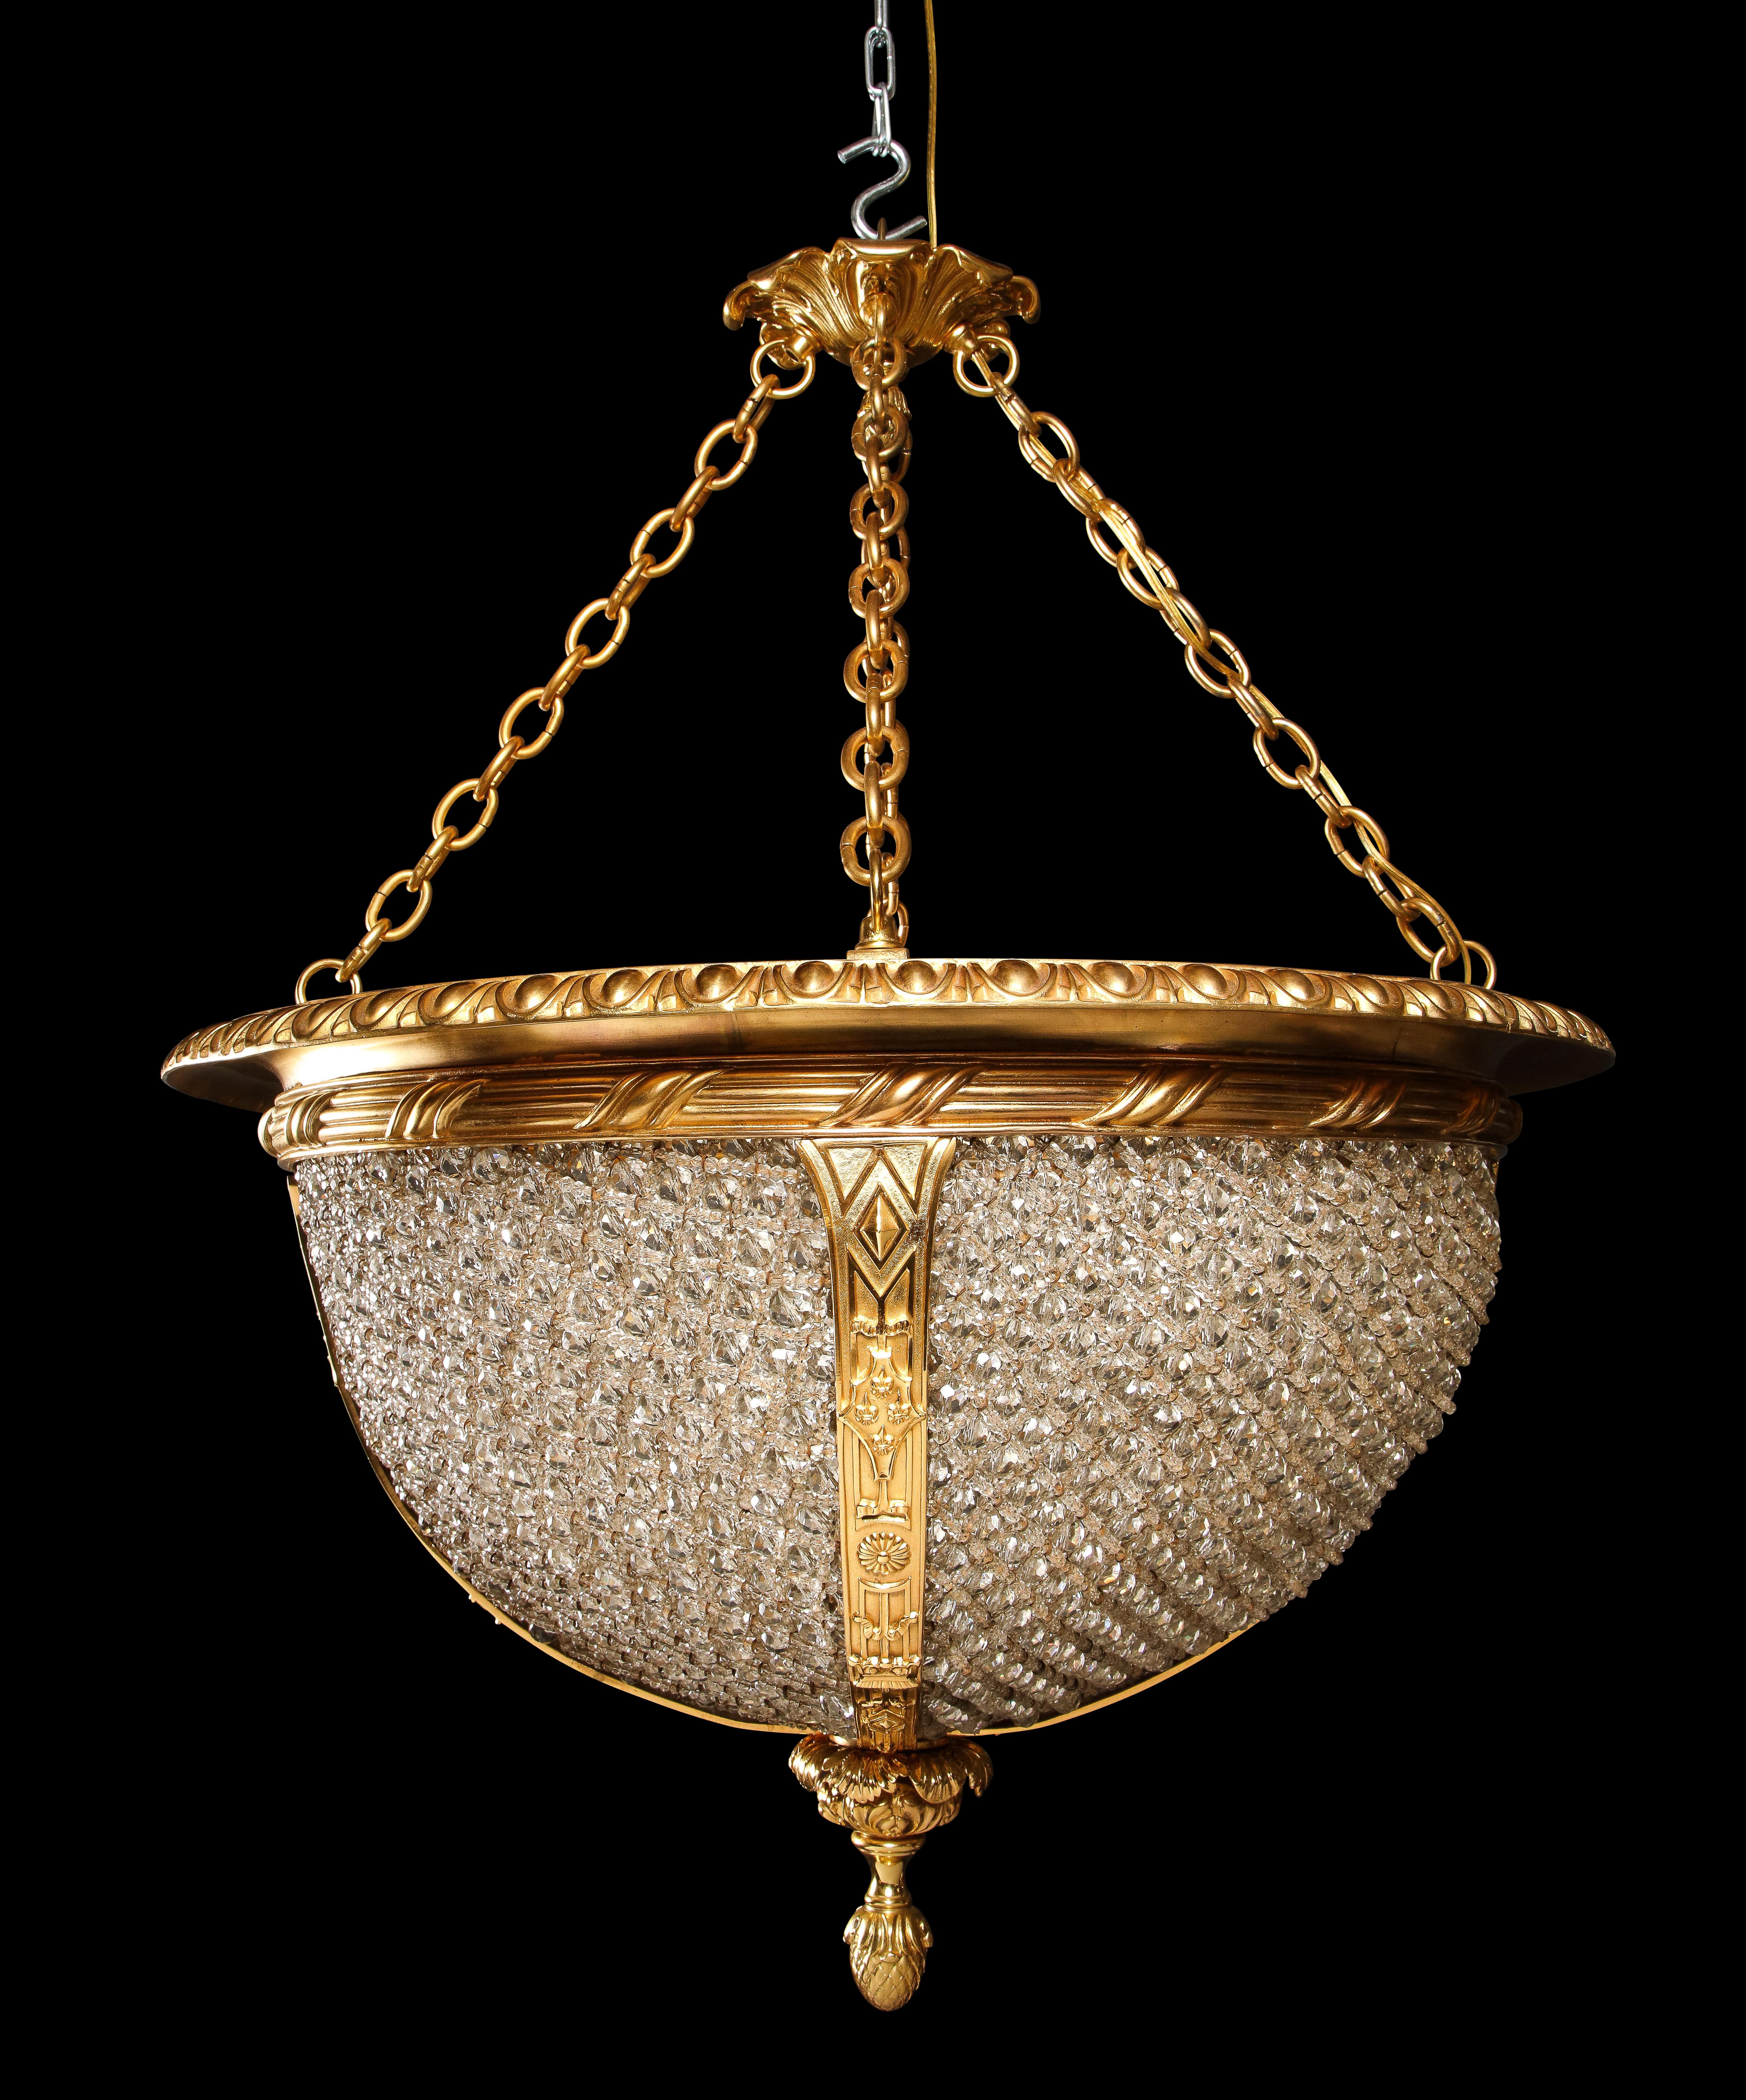 Hollywood Regency Gilt Bronze and beaded glass Circular Chandelier In Good Condition For Sale In New York, NY